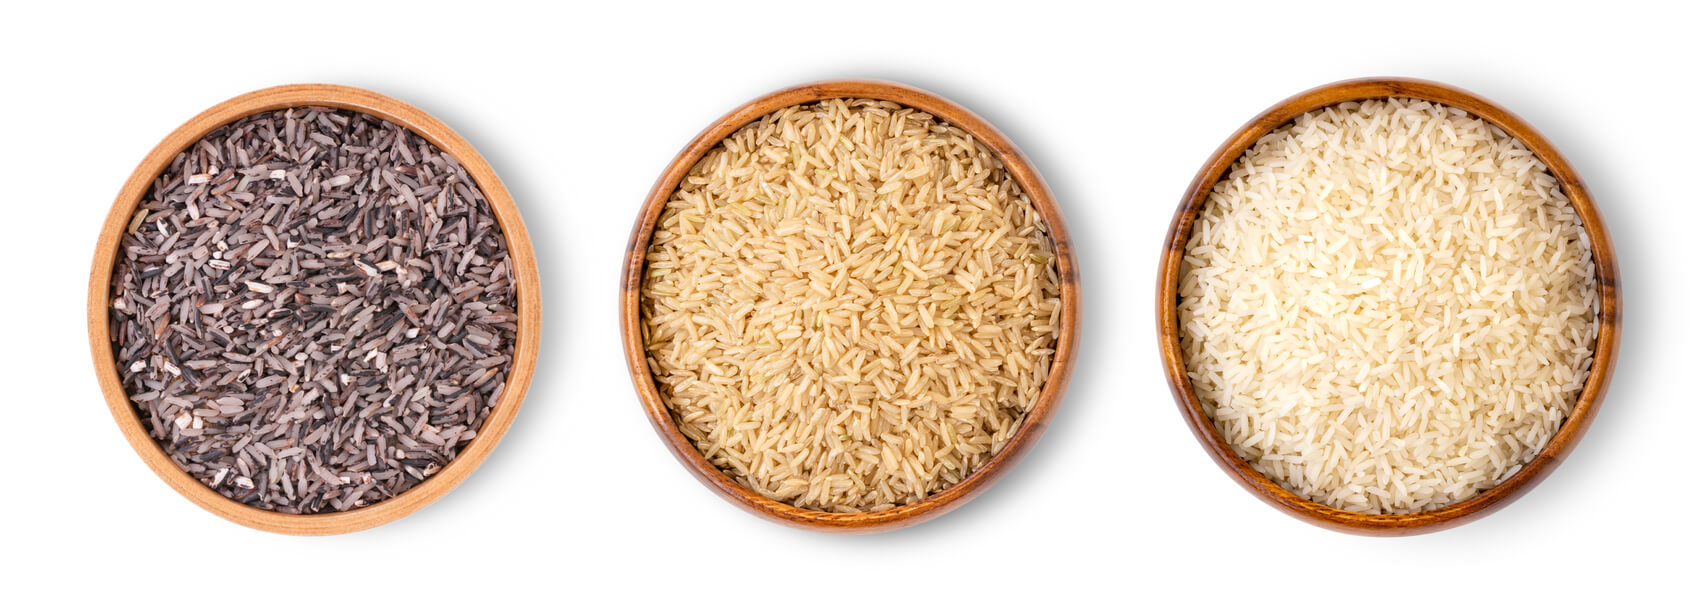 Different types of rice.